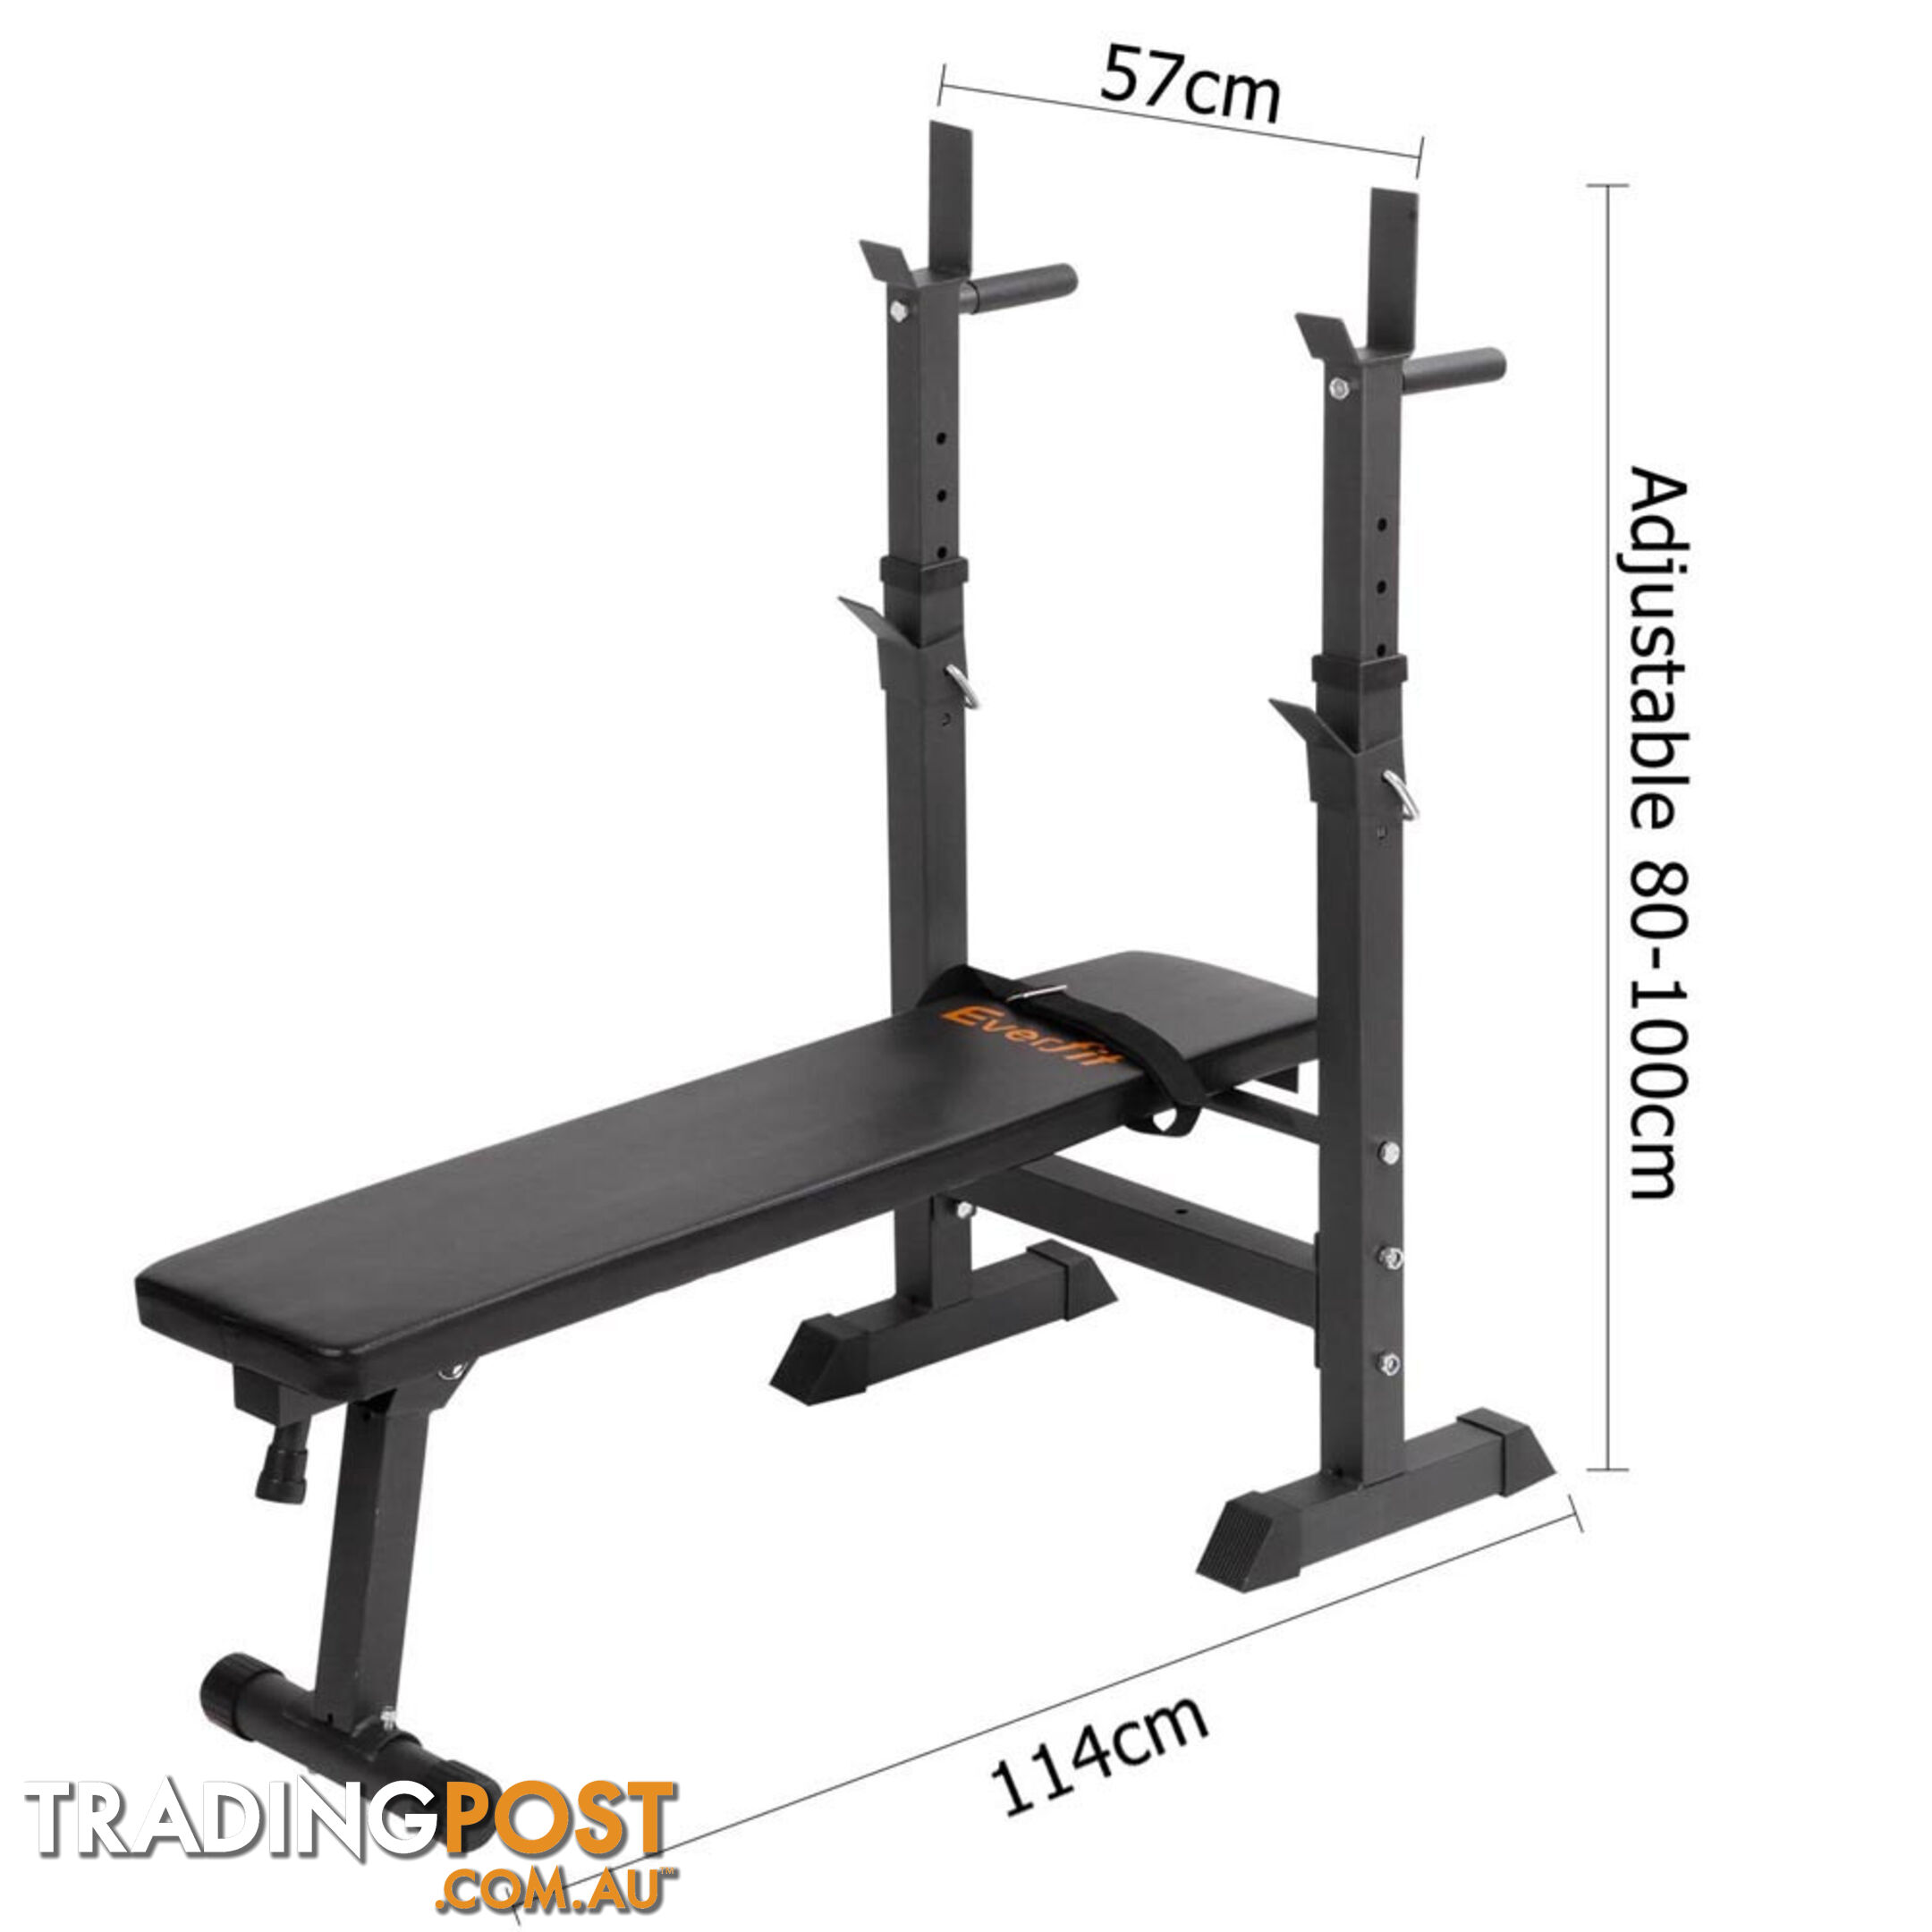 Foldable Fitness Weight Bench 330lbs